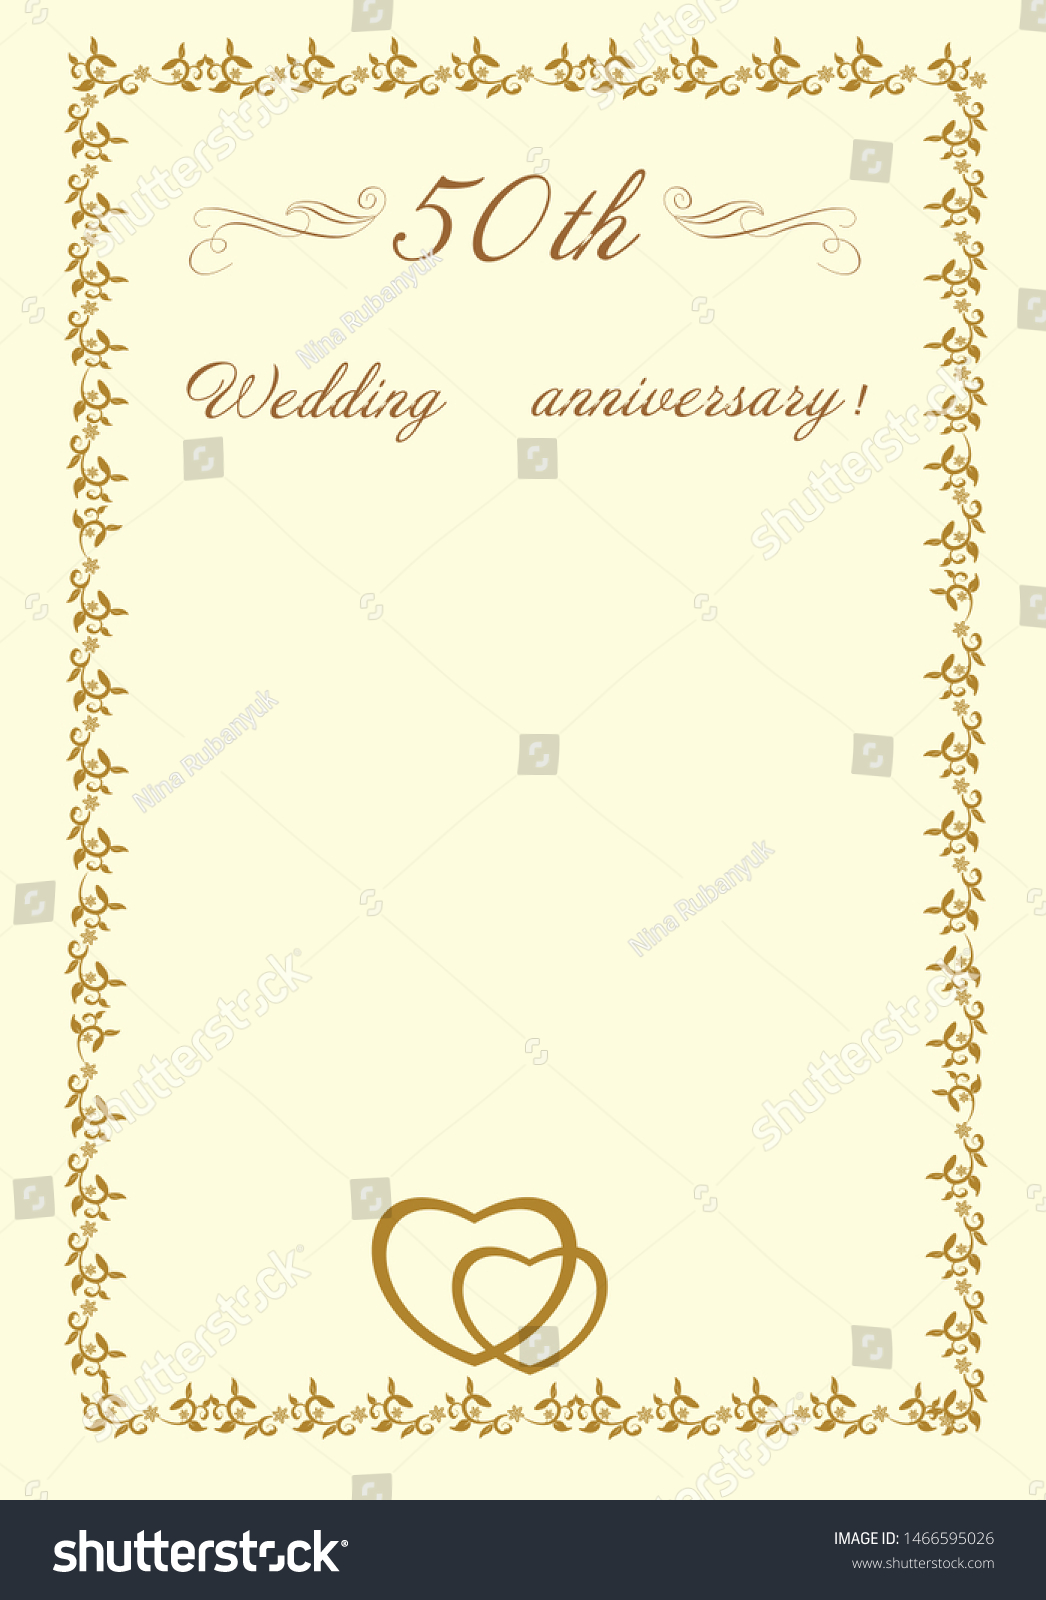 SVG of Golden  anniversary card for greetings and writing text. Golden 50th wedding  celebrate wedding.Wedding invitation card white background. Wedding elements Invitation card. svg